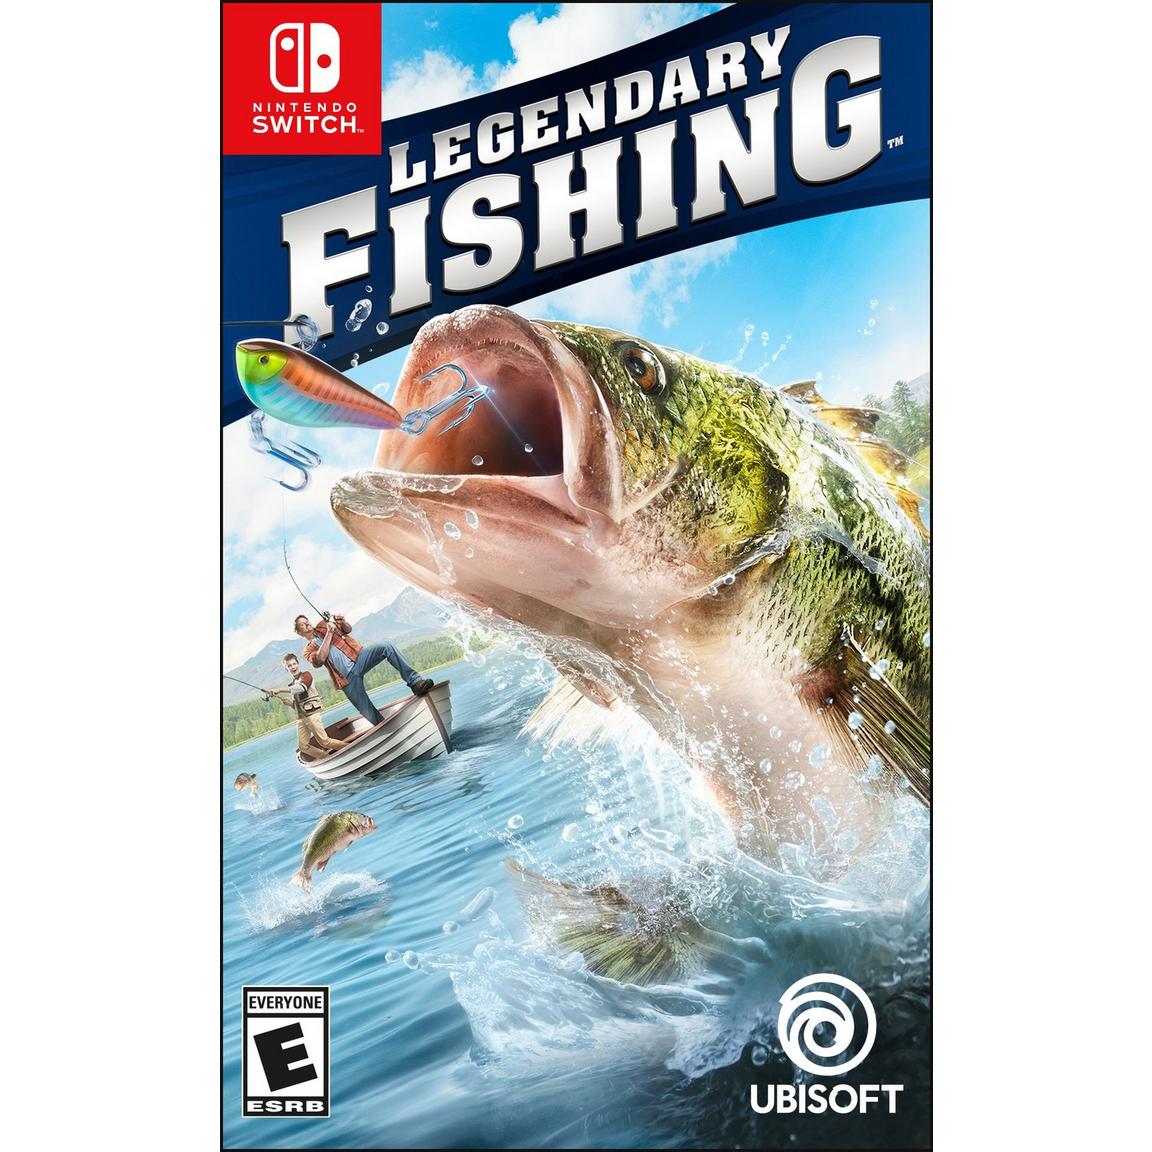 Legendary Fishing - Nintendo Switch, Pre-Owned